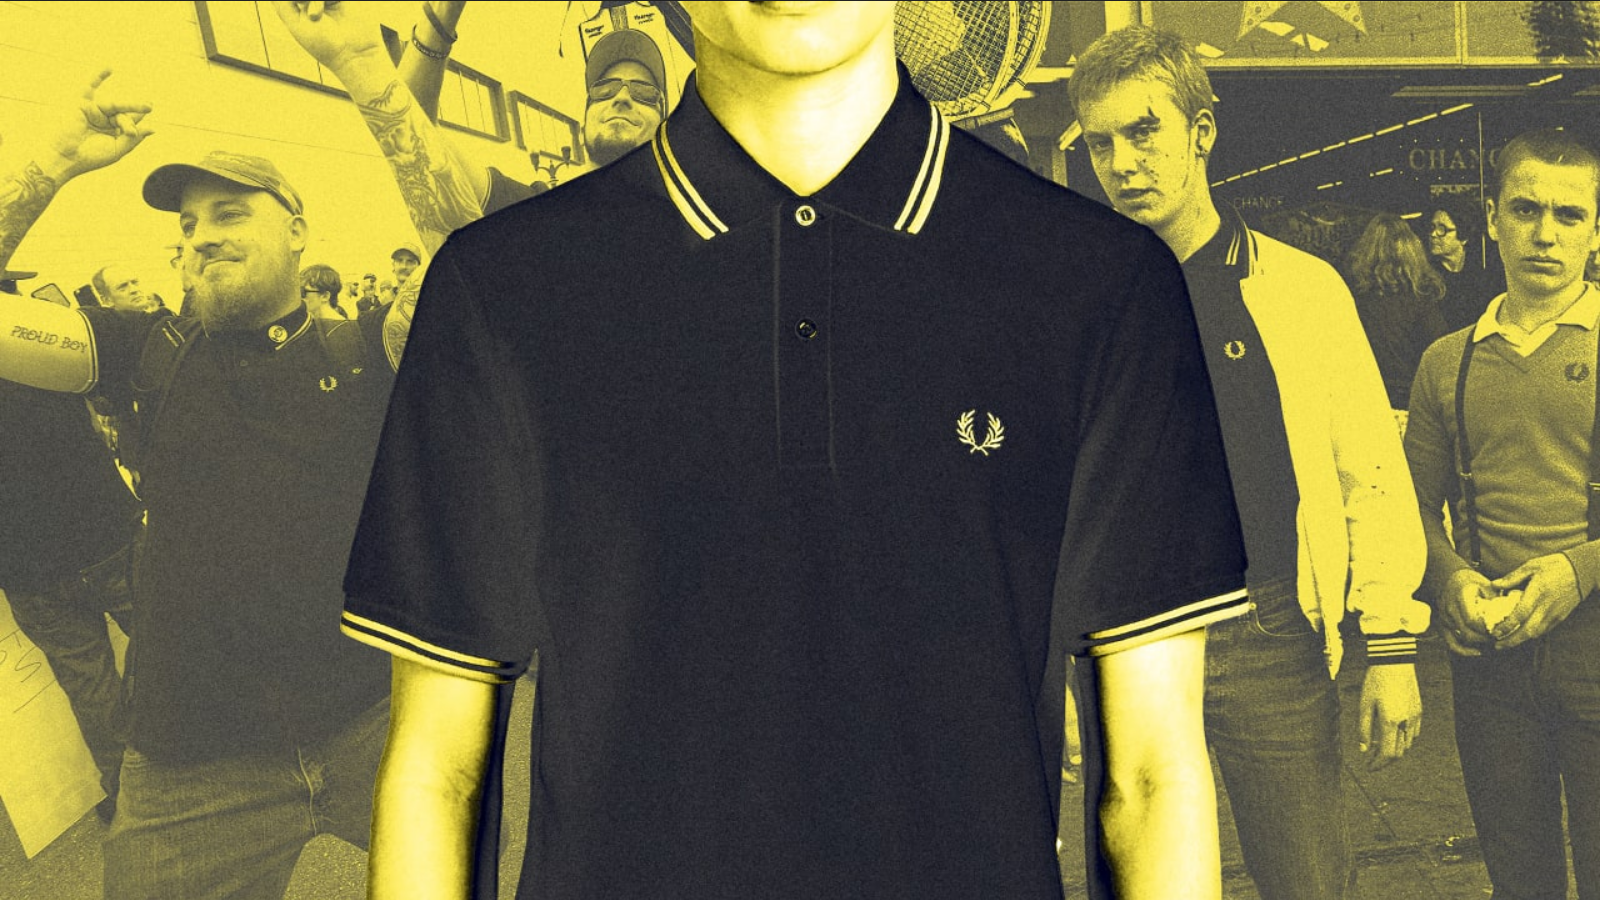 Fashion brand Fred Perry withdraws shirts adopted by US far-right group